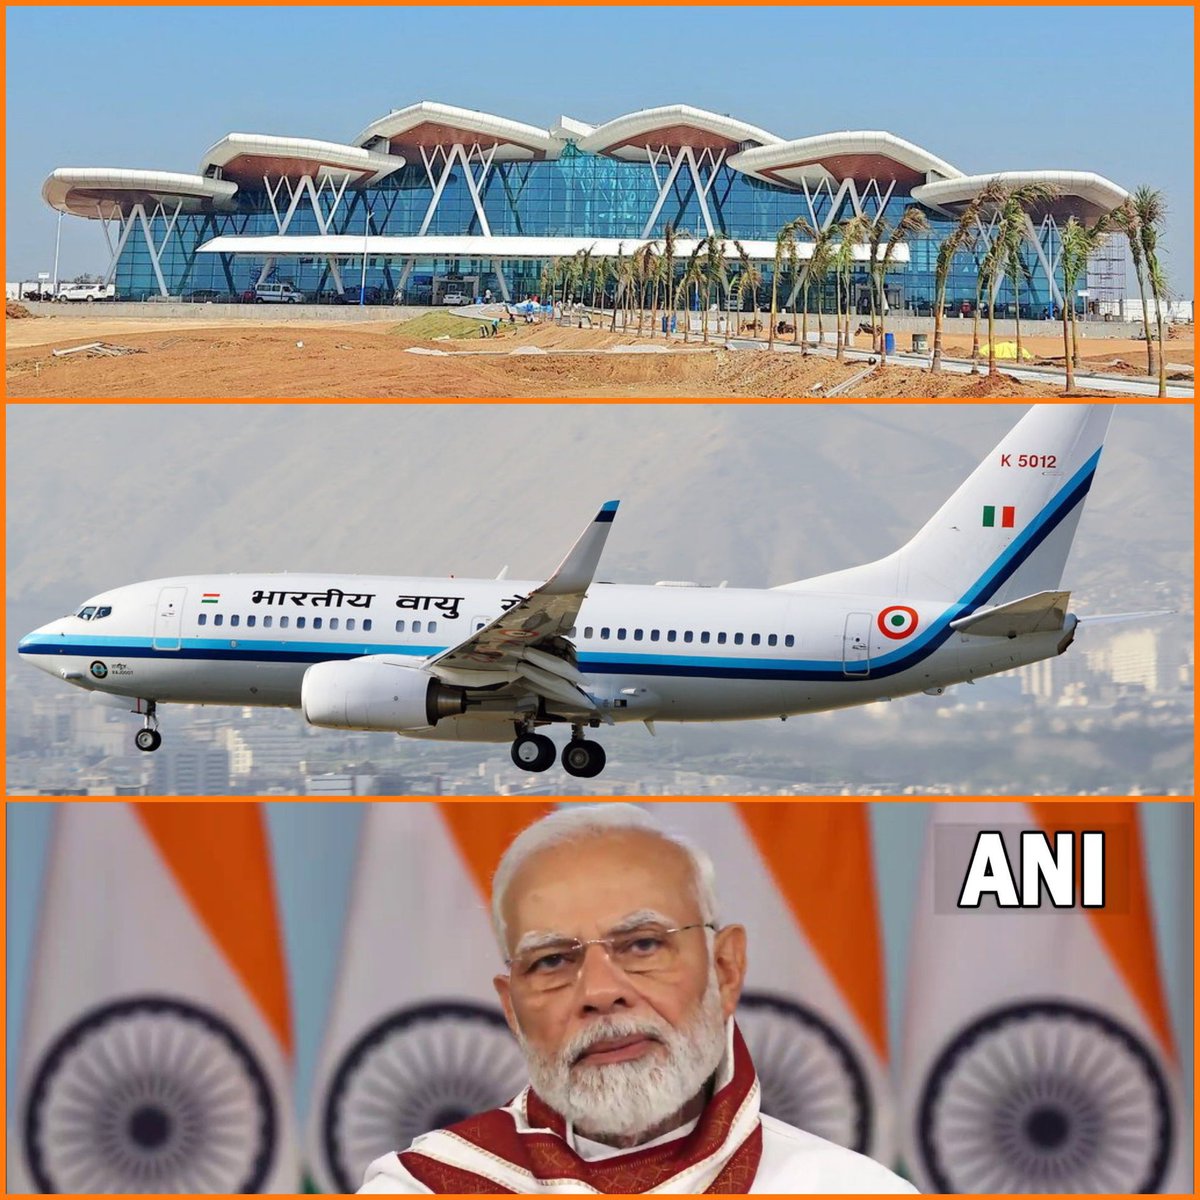 💛❤️long dream of Shivamogga to get an airport will be inaugurated by @narendramodi avaru, tomorrow🙌🏼

27/02
& all the credits to our @BSYBJP 👏🏼
#ShivamoggaAirport